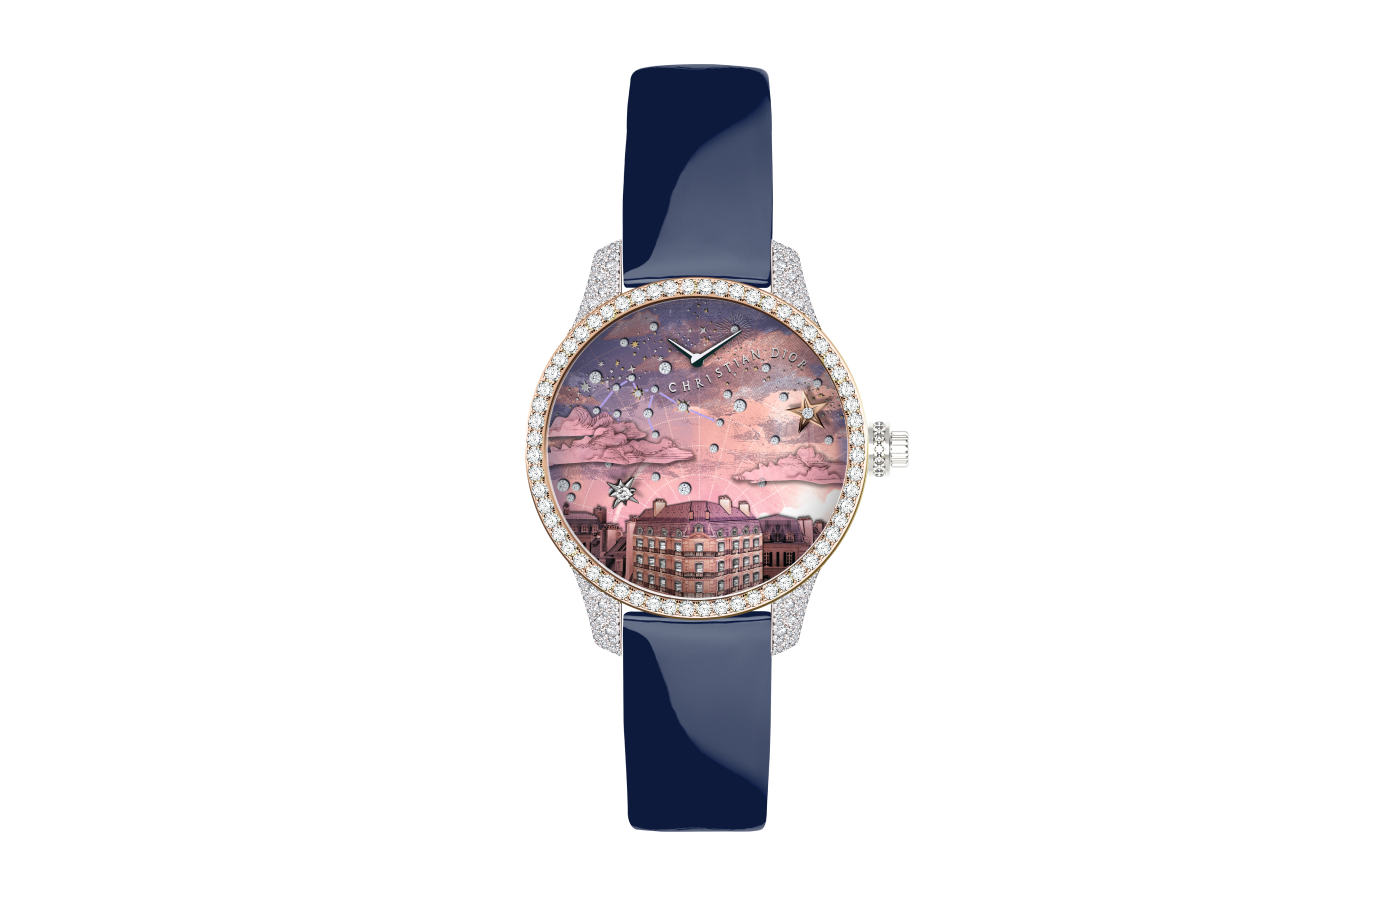 Dior Grand Soir Automate Etoile de Monsieur Dior watch in white gold, pink gold, hand painted enamel, printed pink mother of pearl and diamond